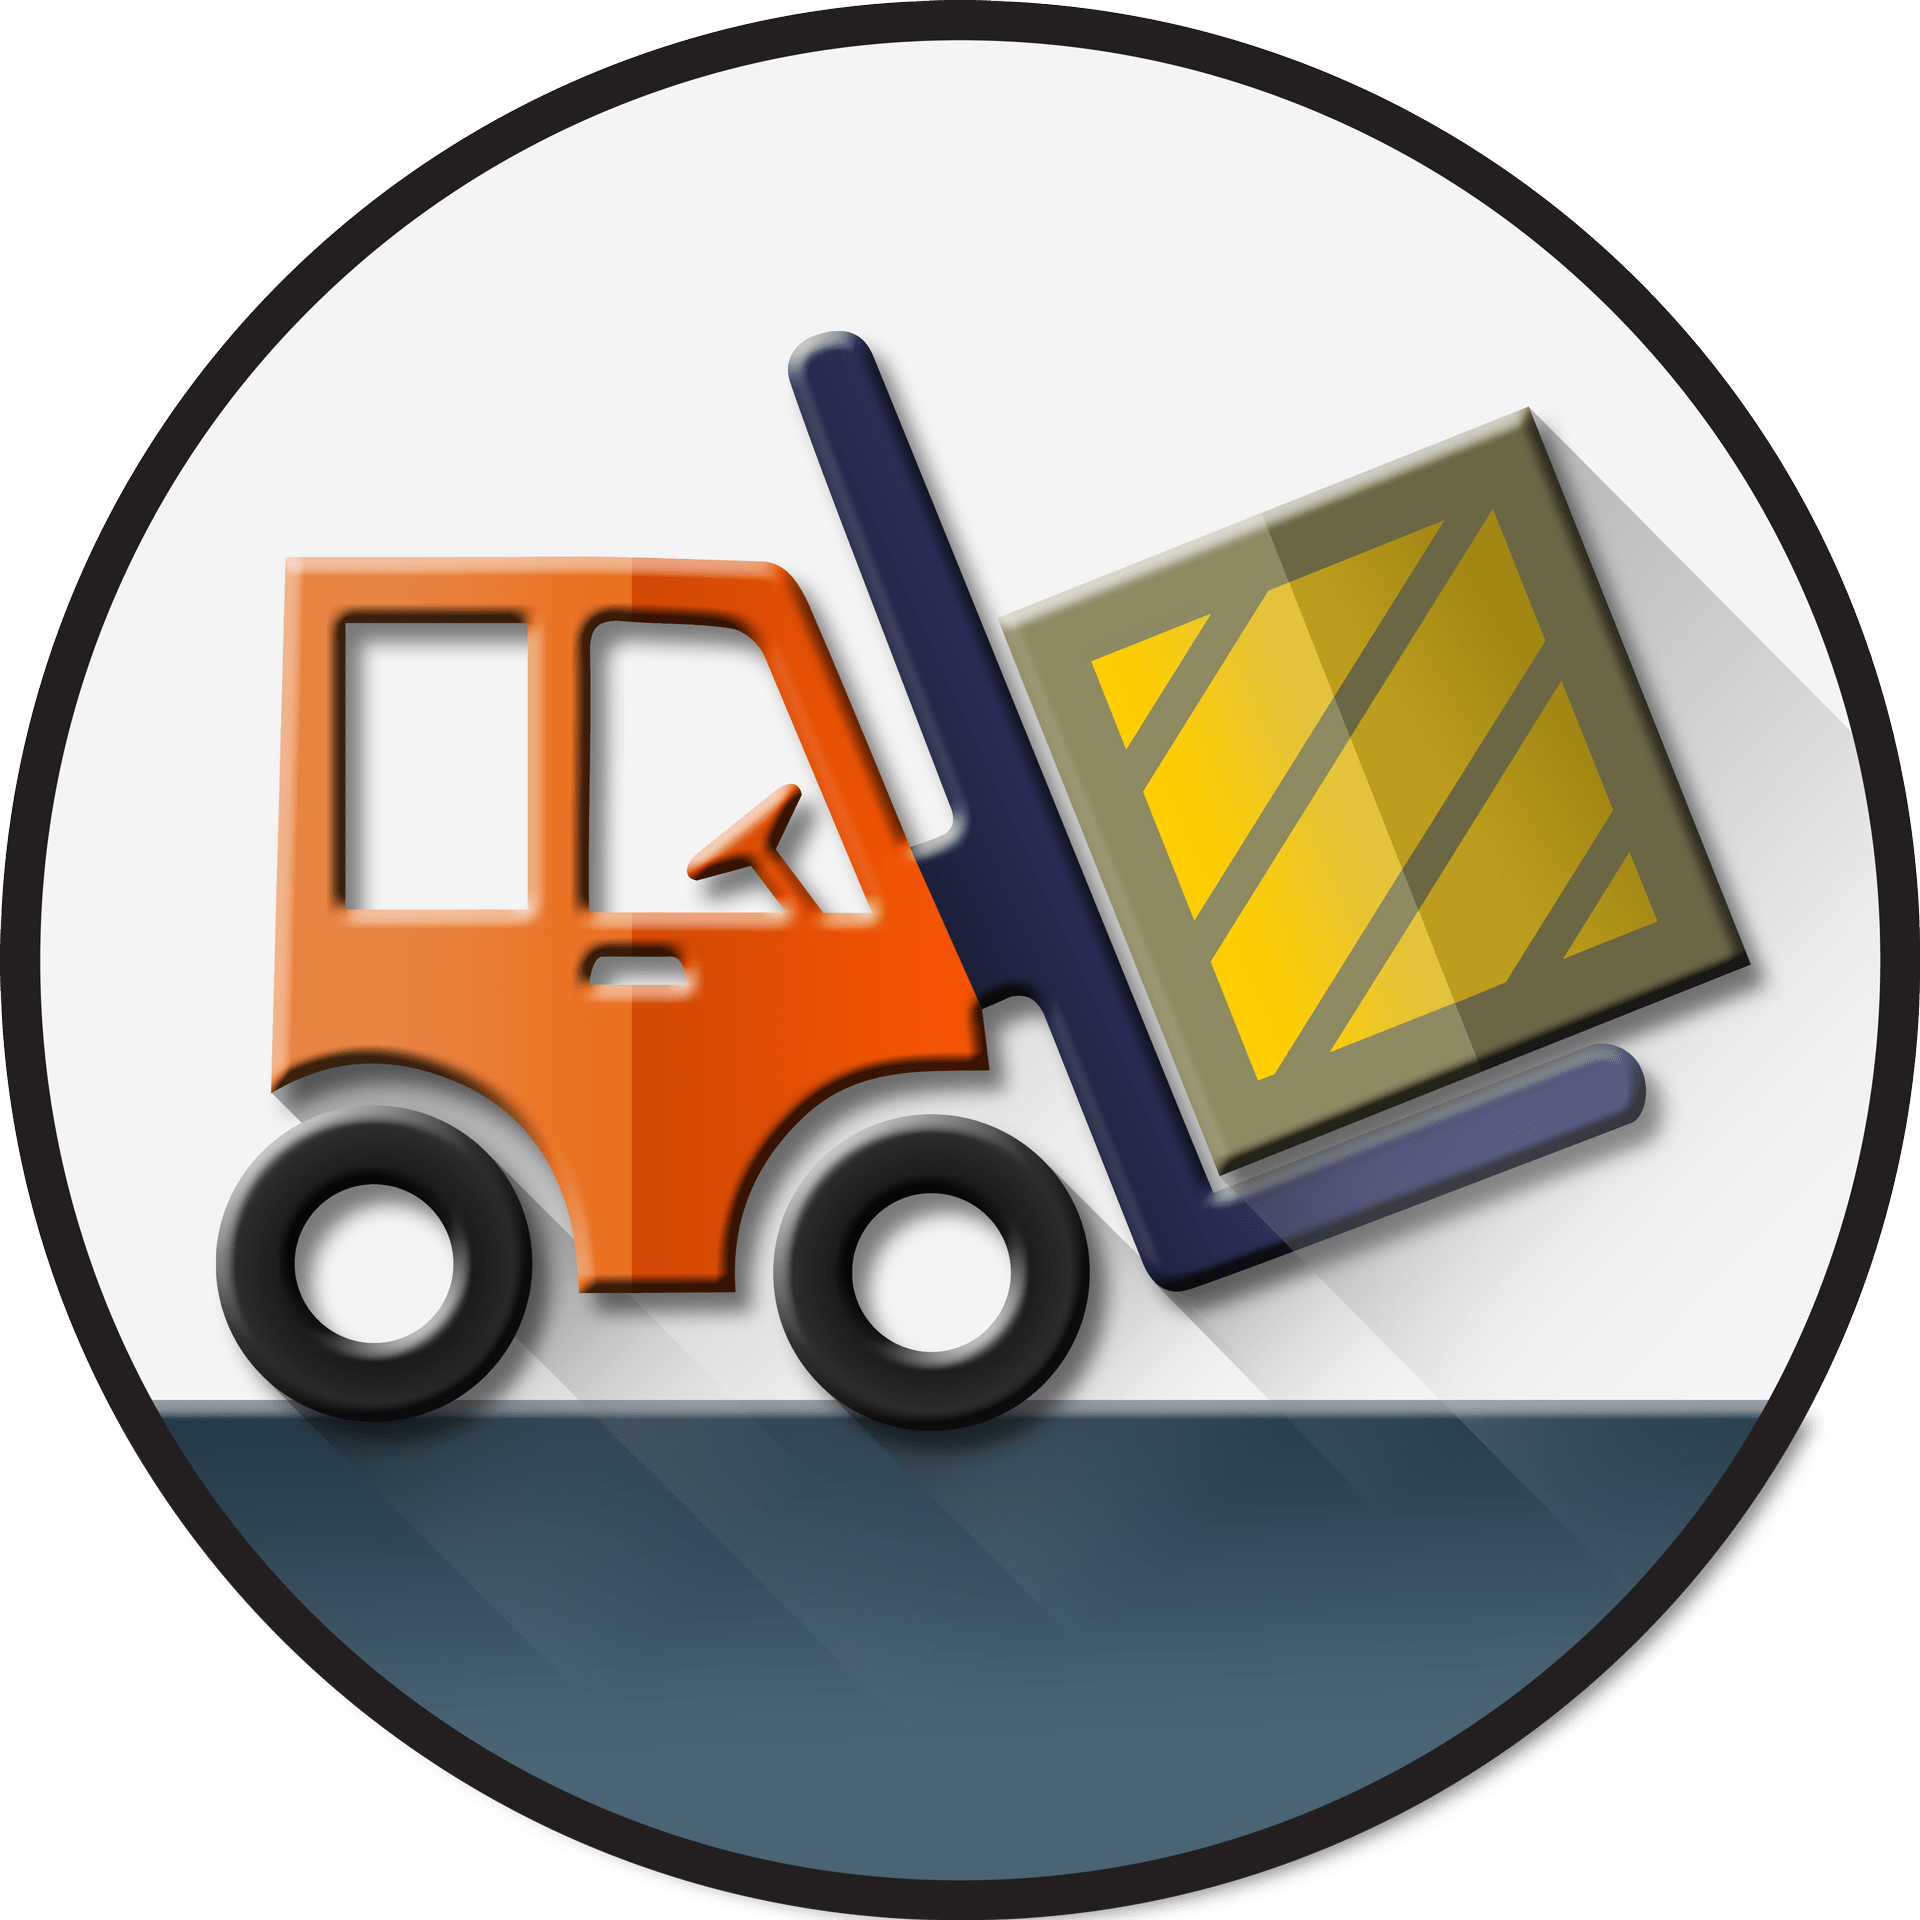 What To Look For In A Professional Forklift Service Company